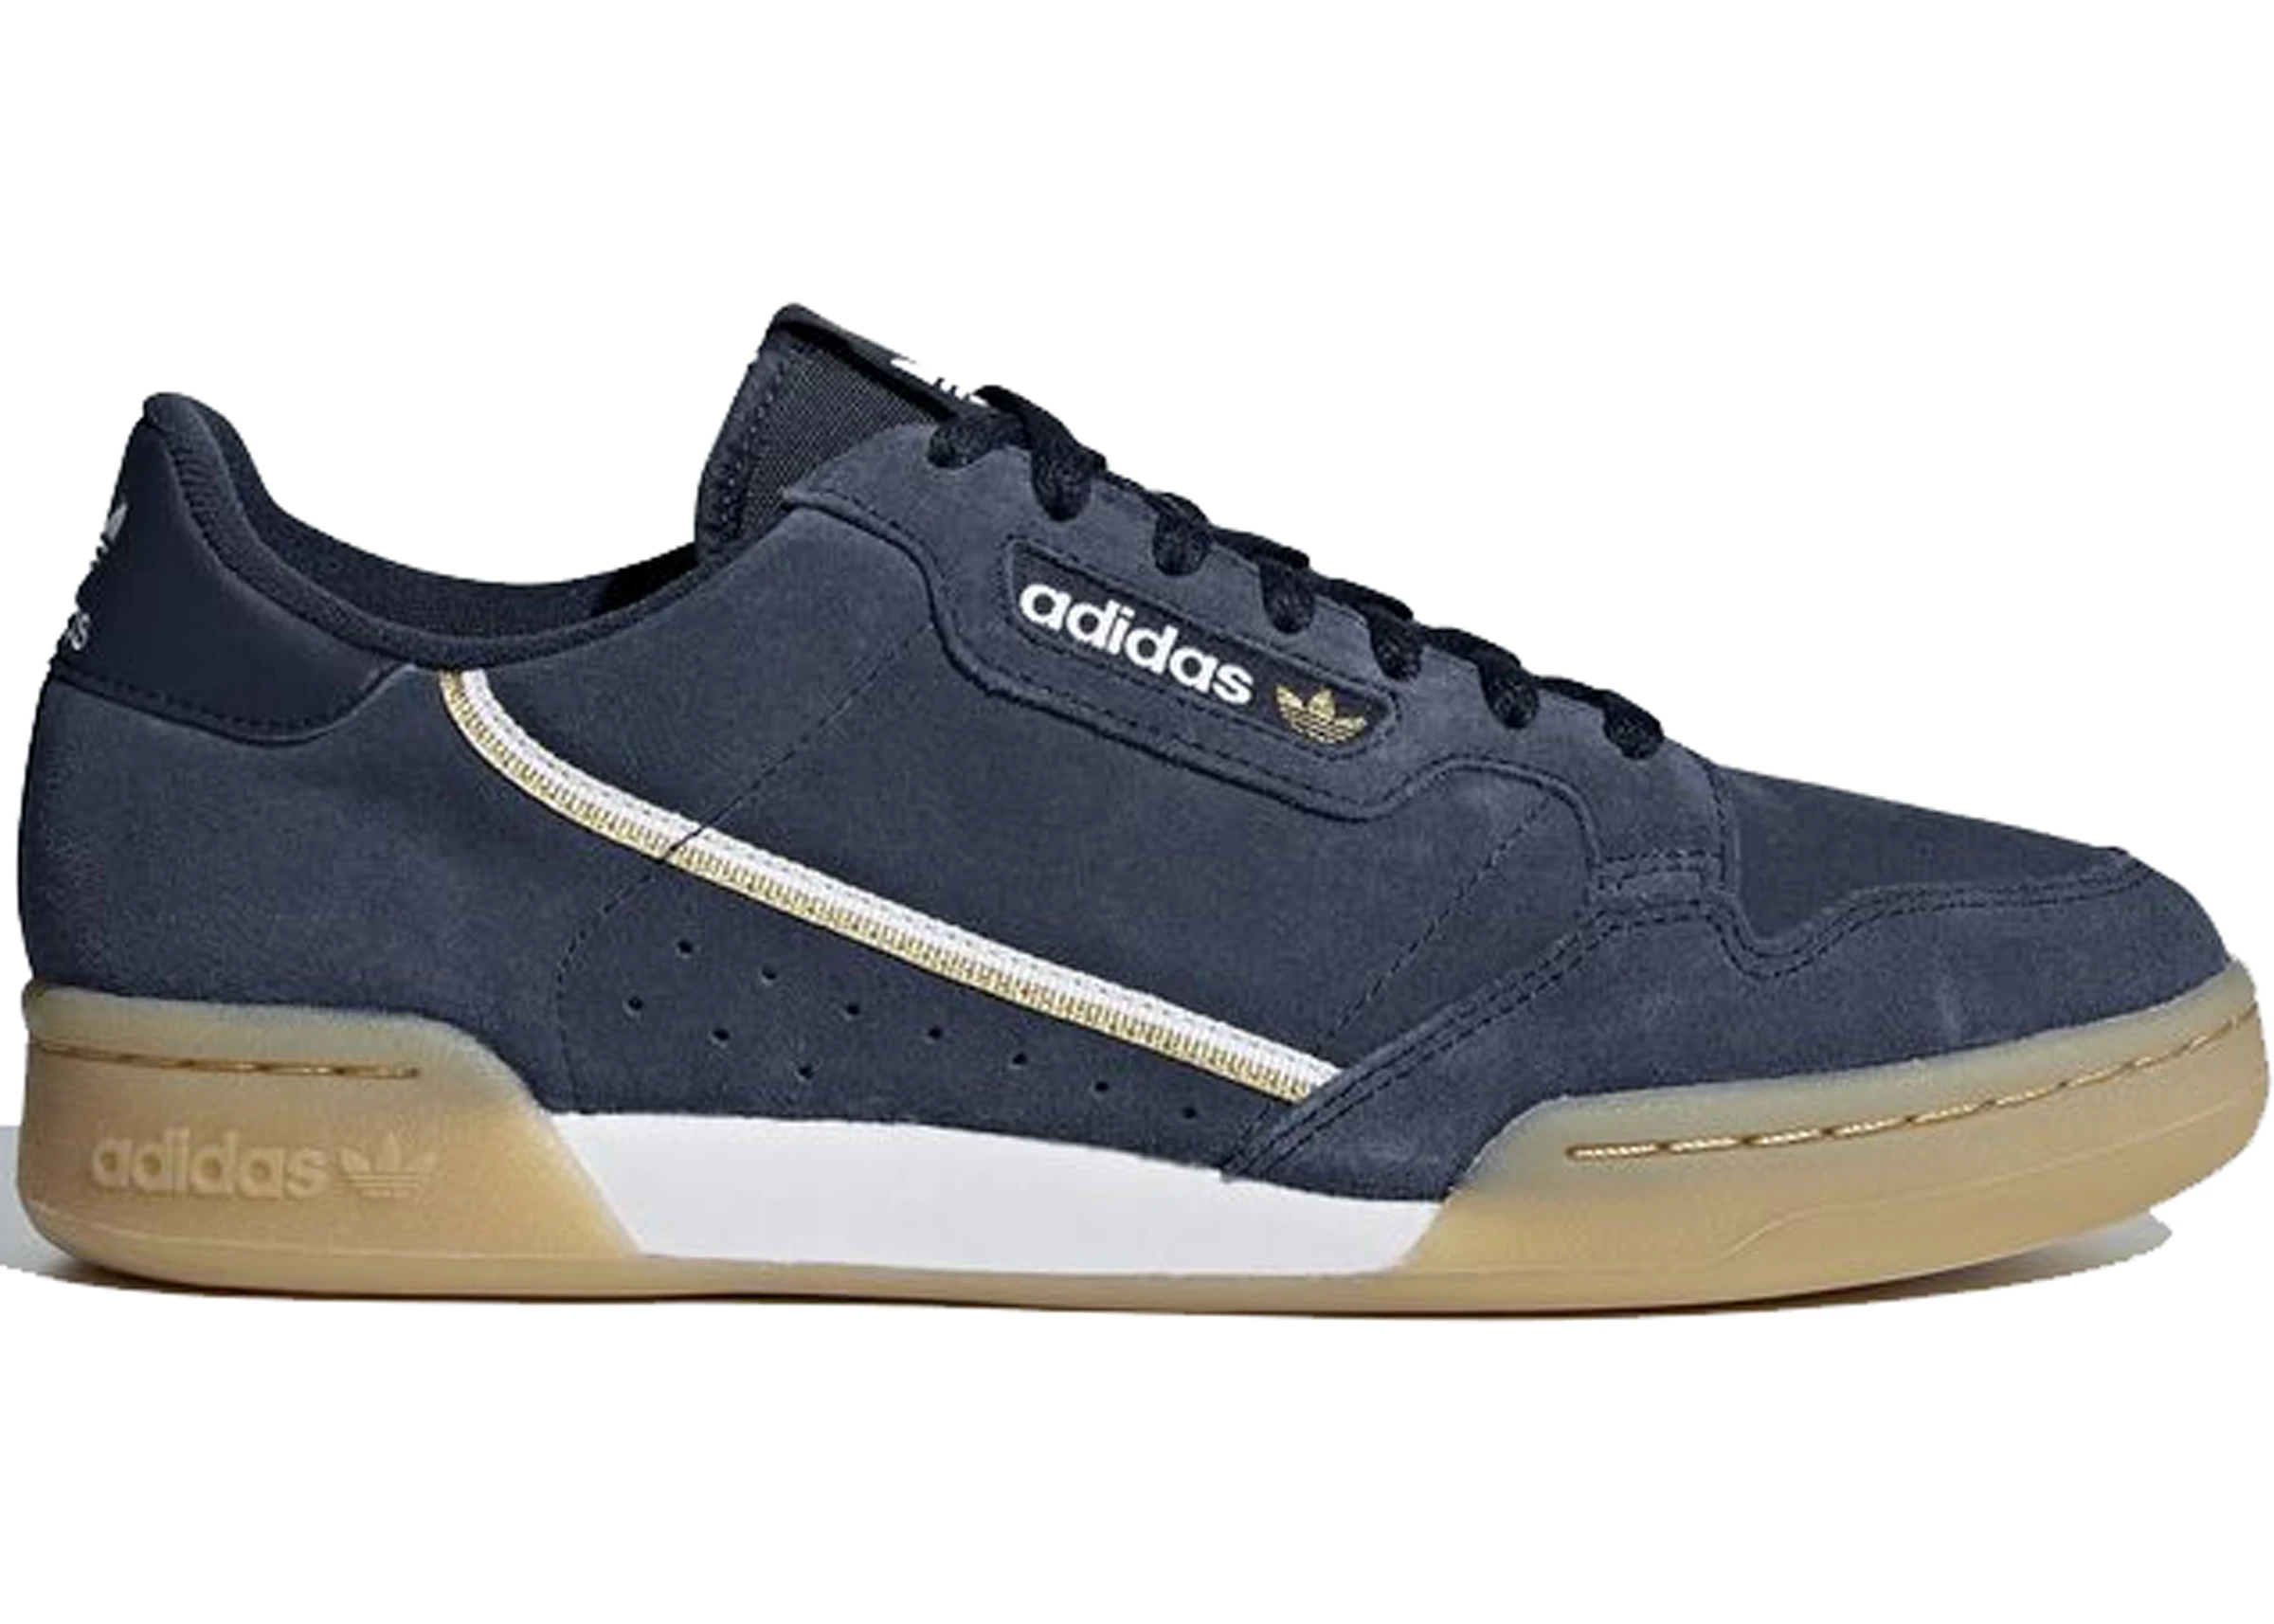 acceleration hostage Made to remember adidas Continental 80 Collegiate Navy Gum - CG6537 - US